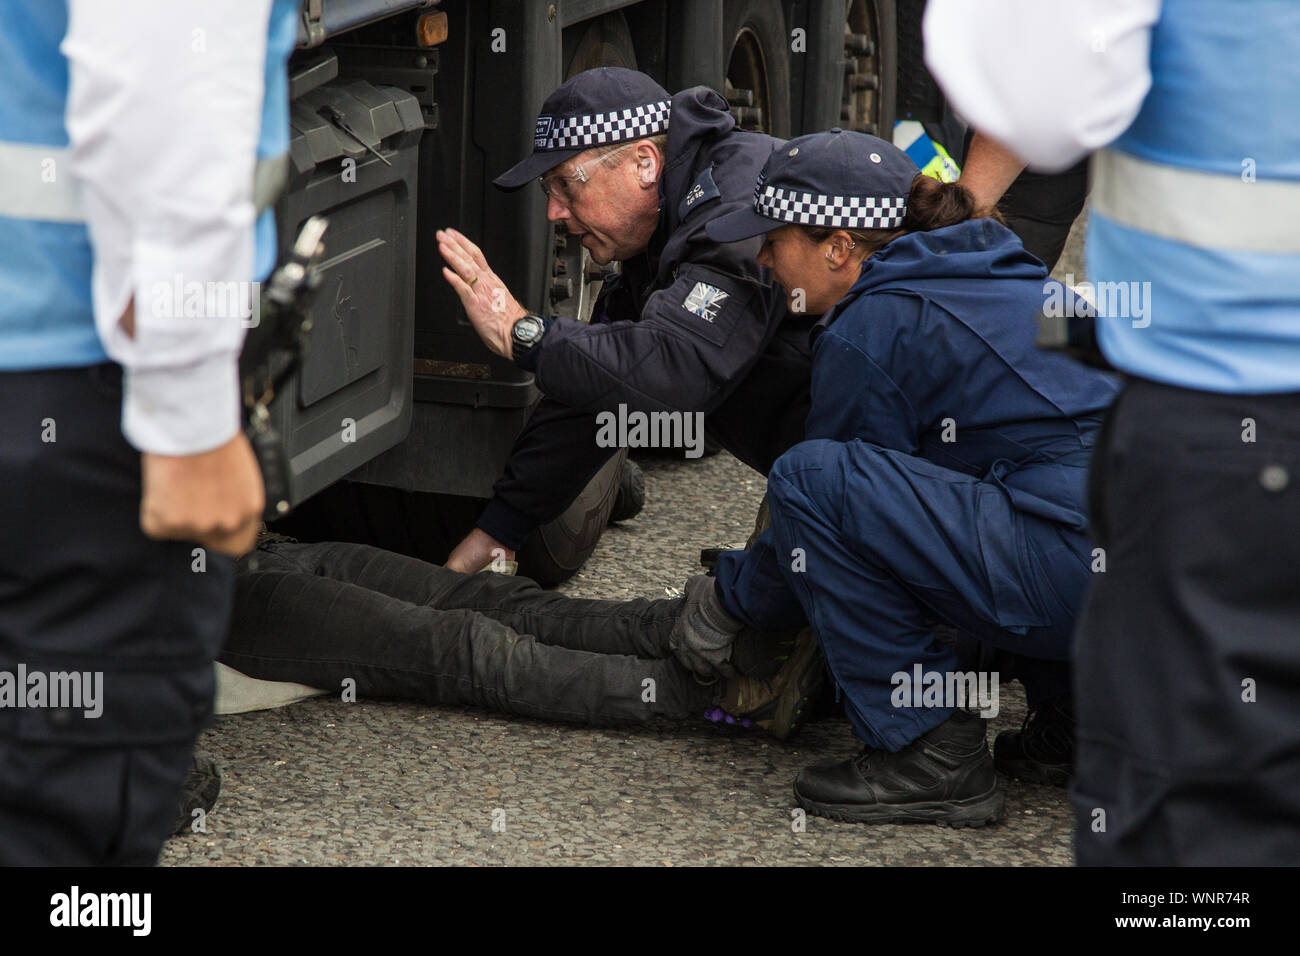 London, UK. 6 September, 2019. Metropolitan Police officers remove an activist who had locked herself beneath a truck making a delivery to ExCel London for DSEI, the world’s largest arms fair. The road remained blocked for several hours. The fifth day of protests against the arms fair was themed as Stop The Arms Fair: Stop Climate Change in order to highlight links between the fossil fuel and arms industries. Credit: Mark Kerrison/Alamy Live News Stock Photo